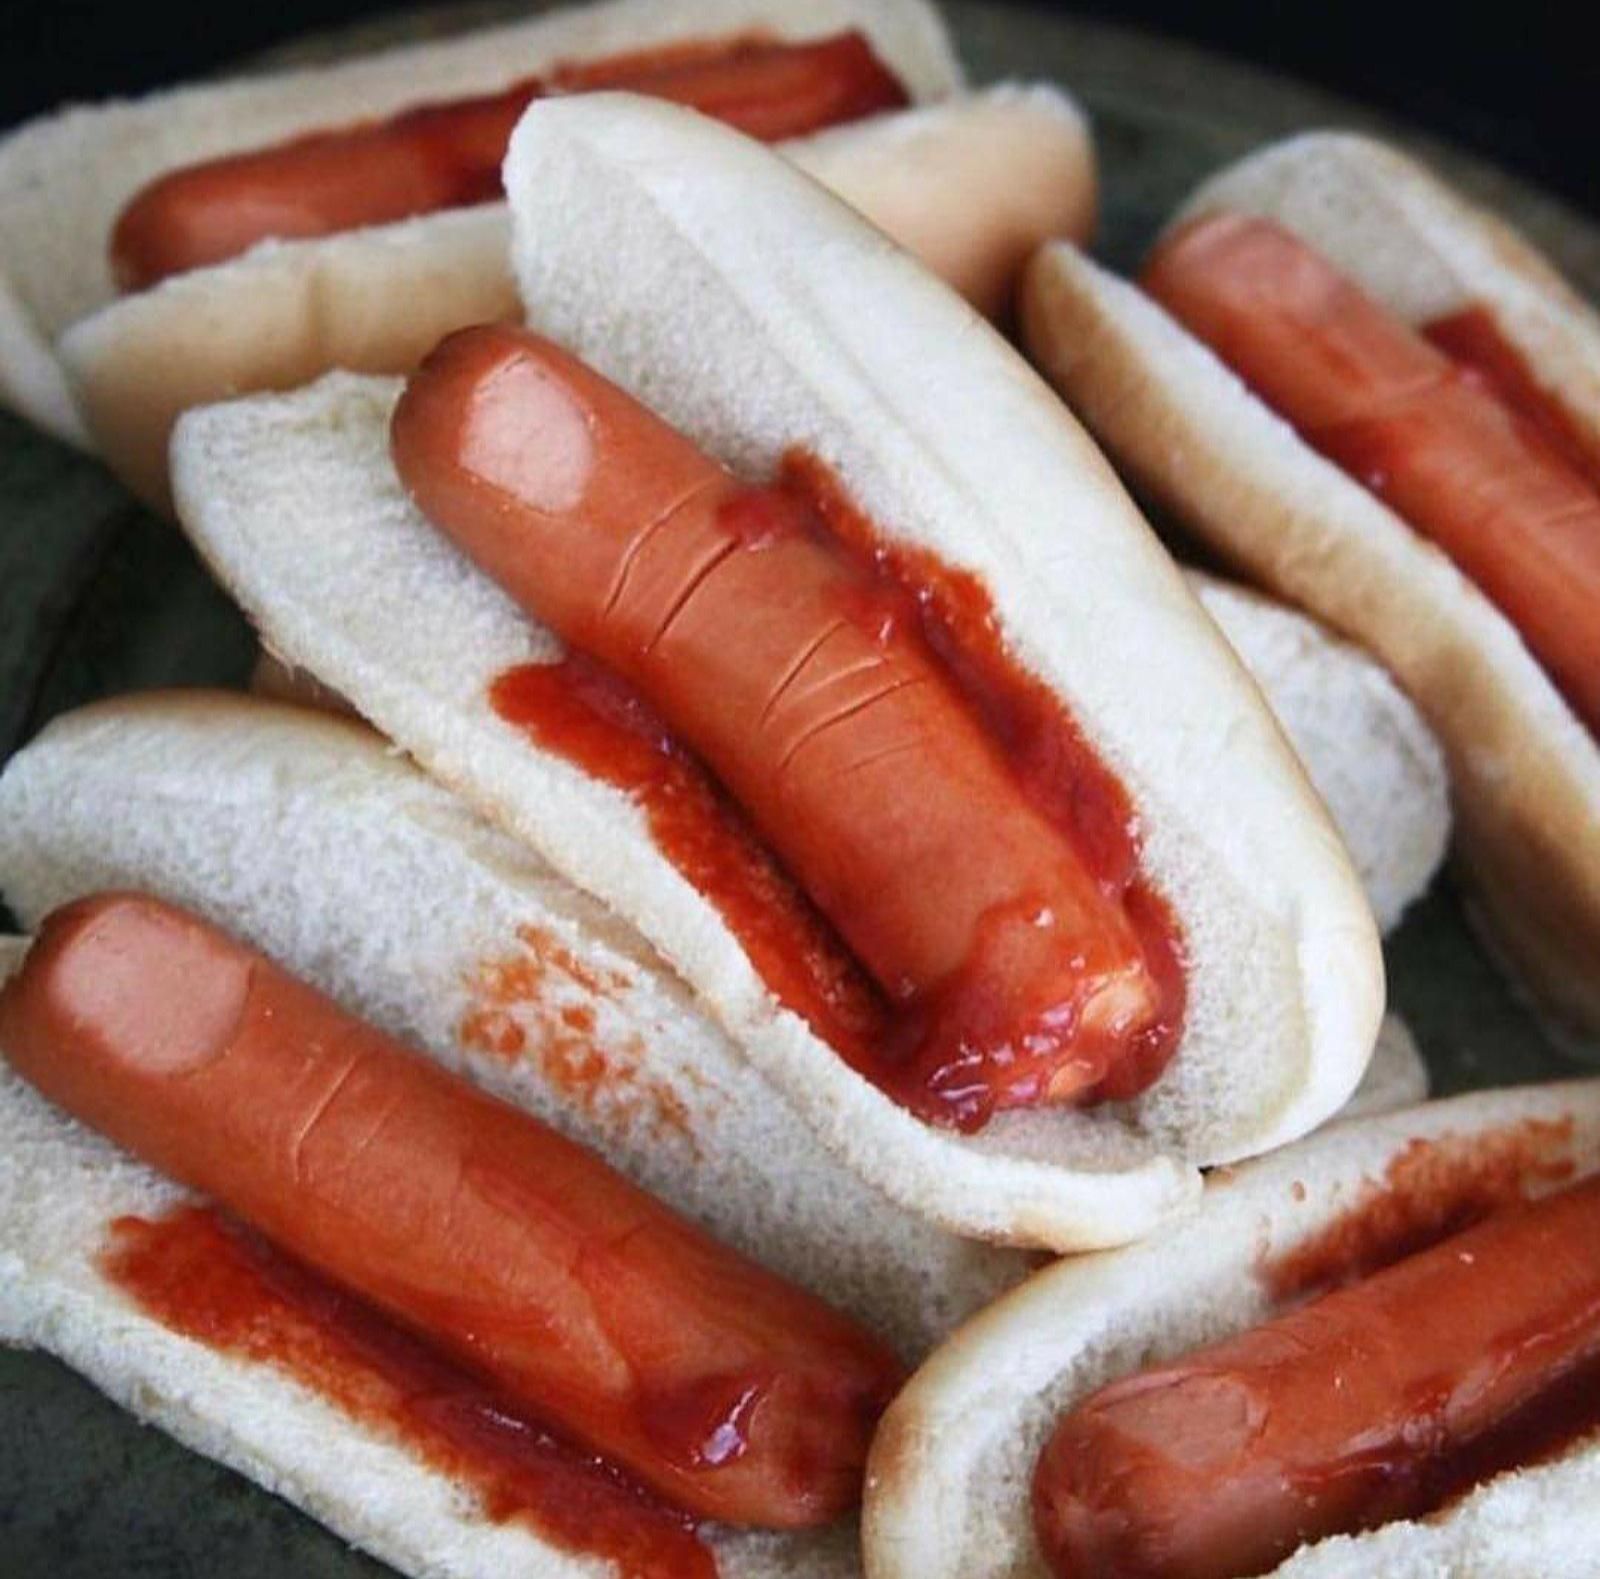 Cleverly crafted weenies for Halloween.